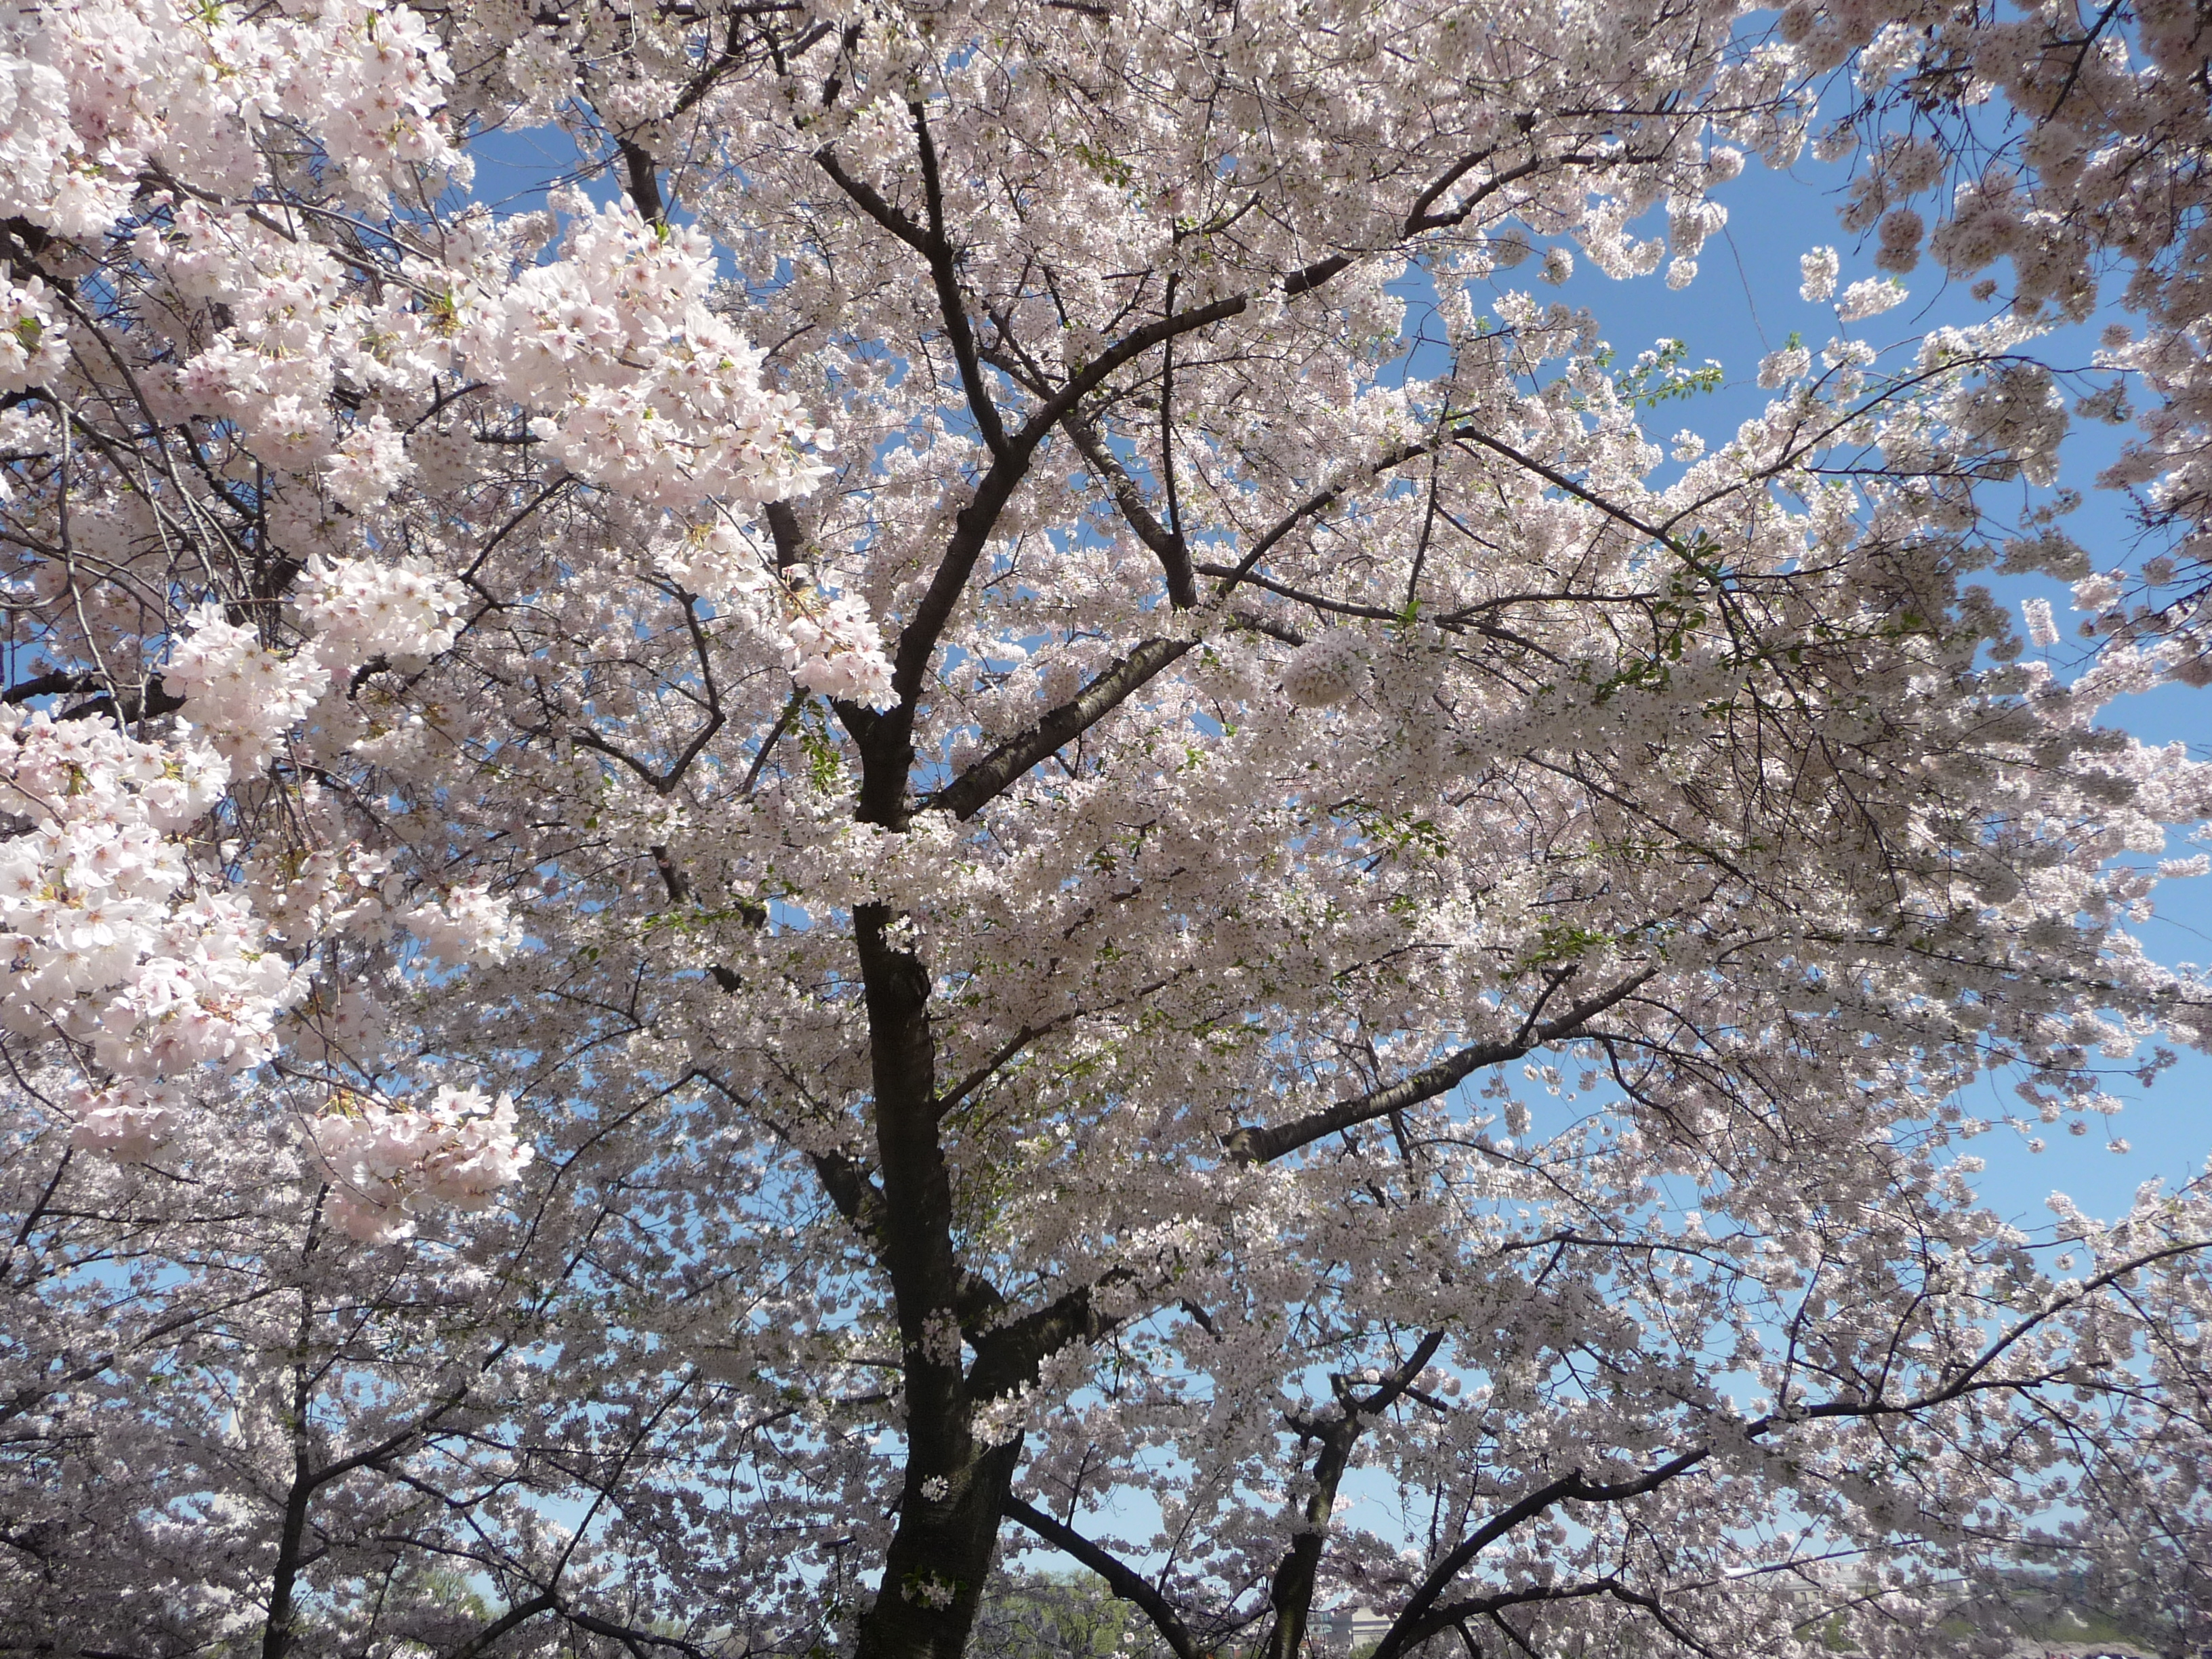  See a map and directions to the cherry blossoms in washington dc